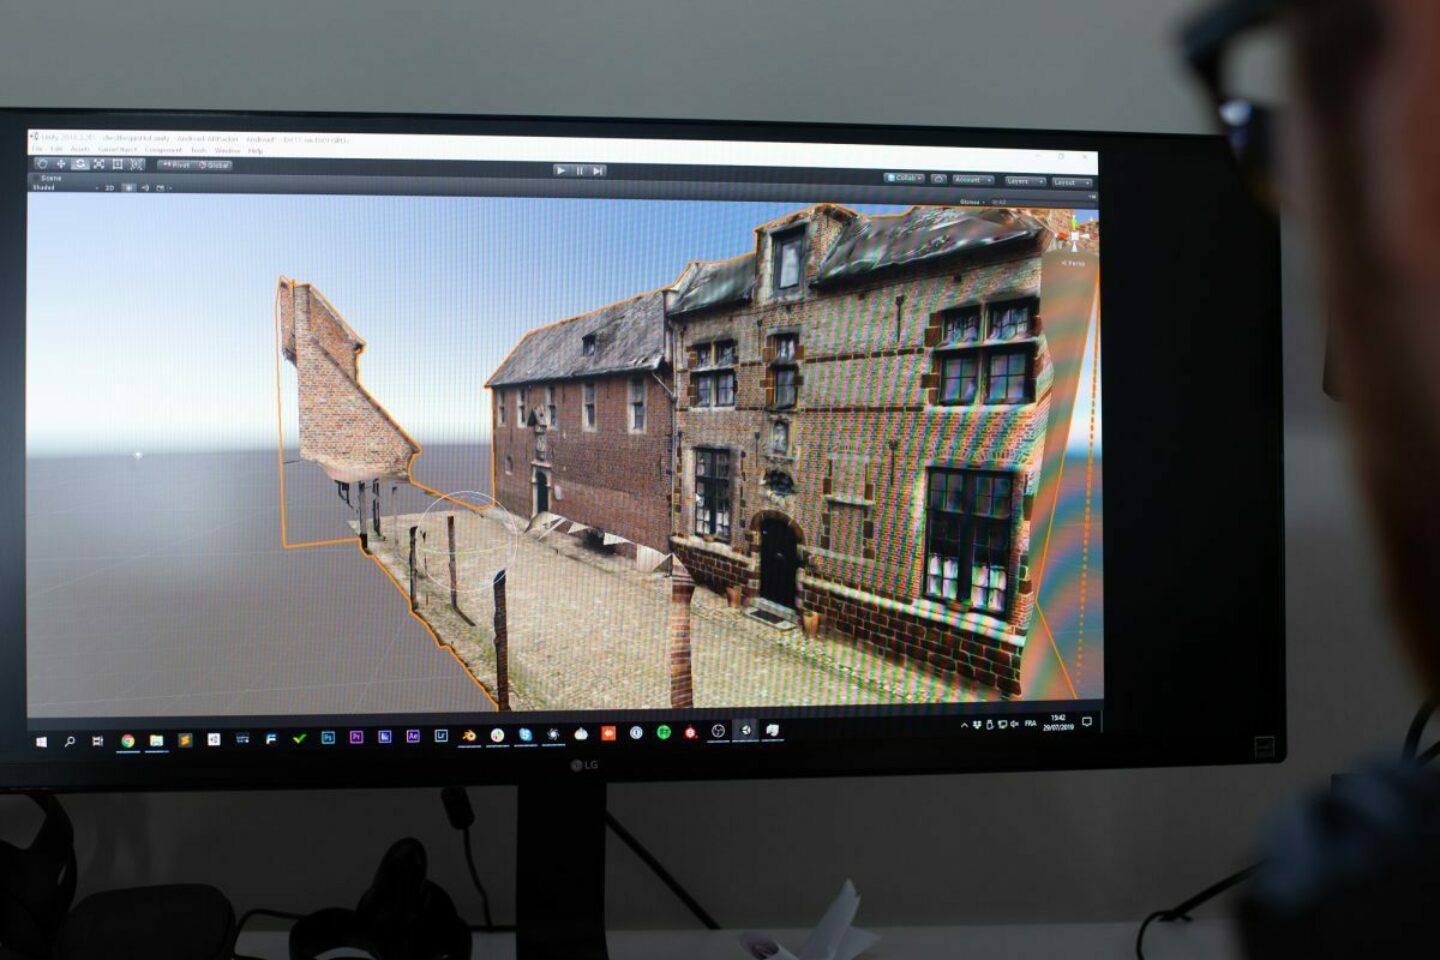 Making 3D models using pictures with photogrammetry